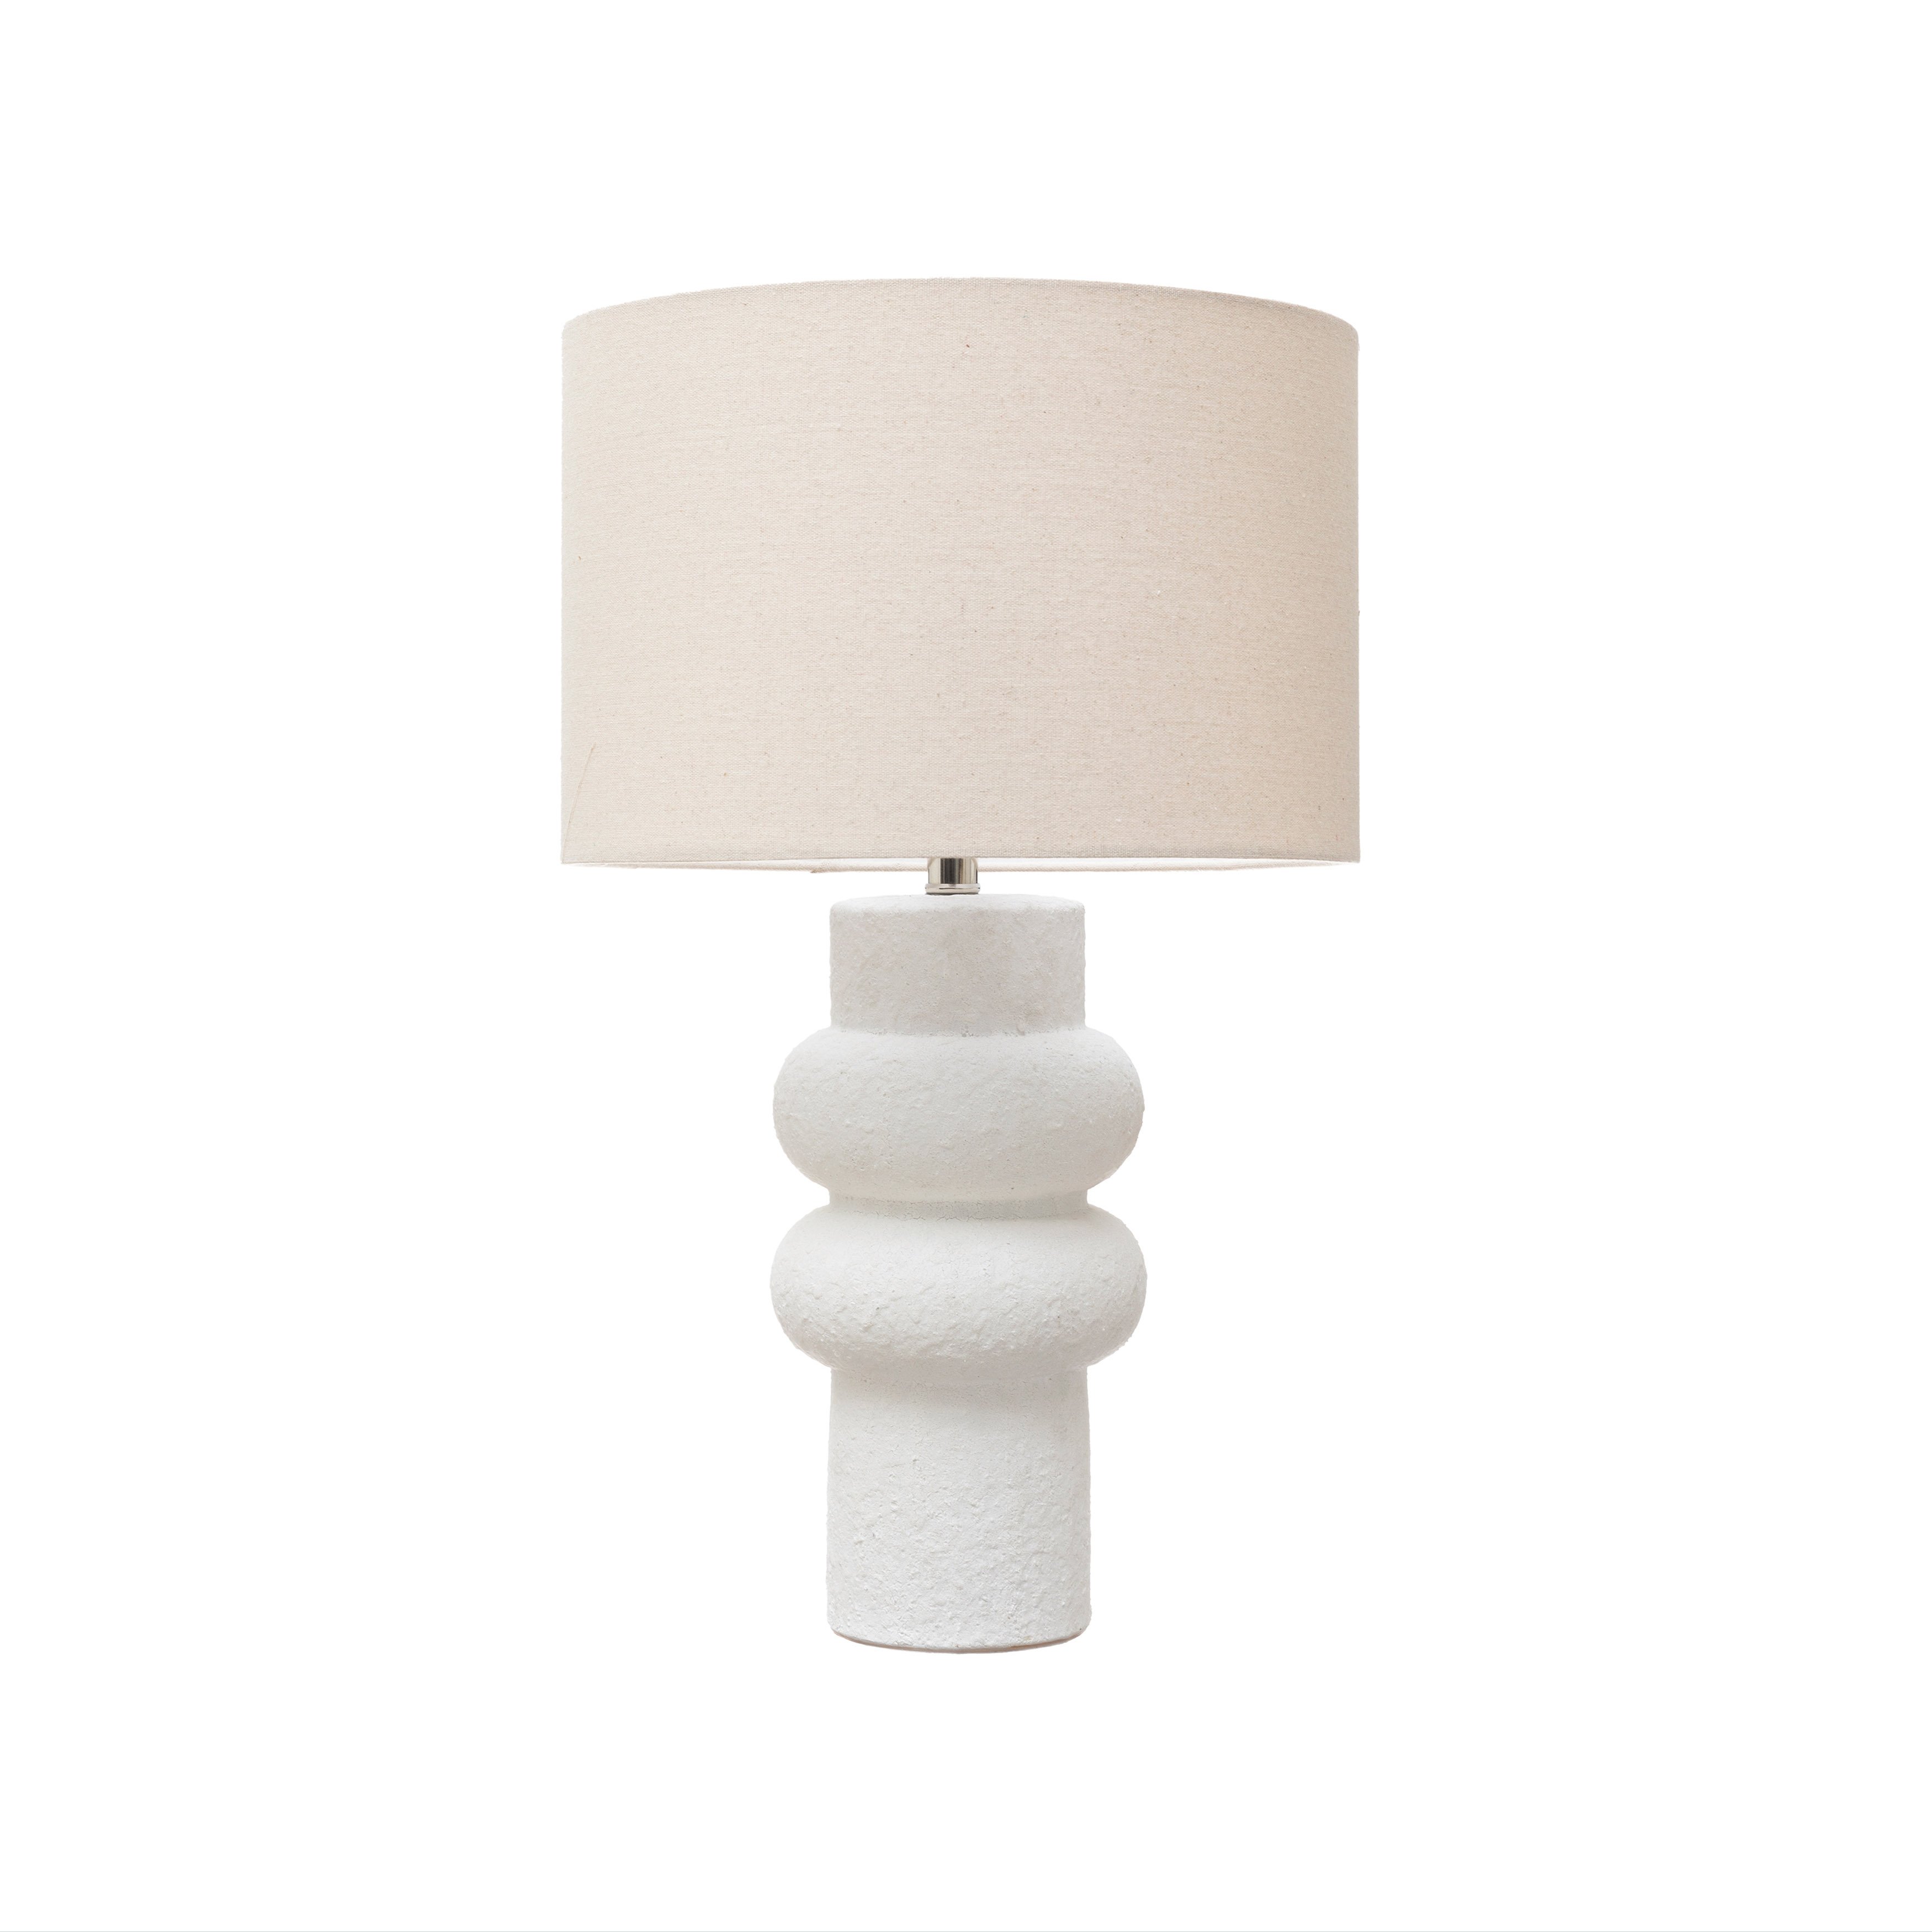  Stoneware Table Lamp with Linen Shade, White Volcano Finish - Image 0